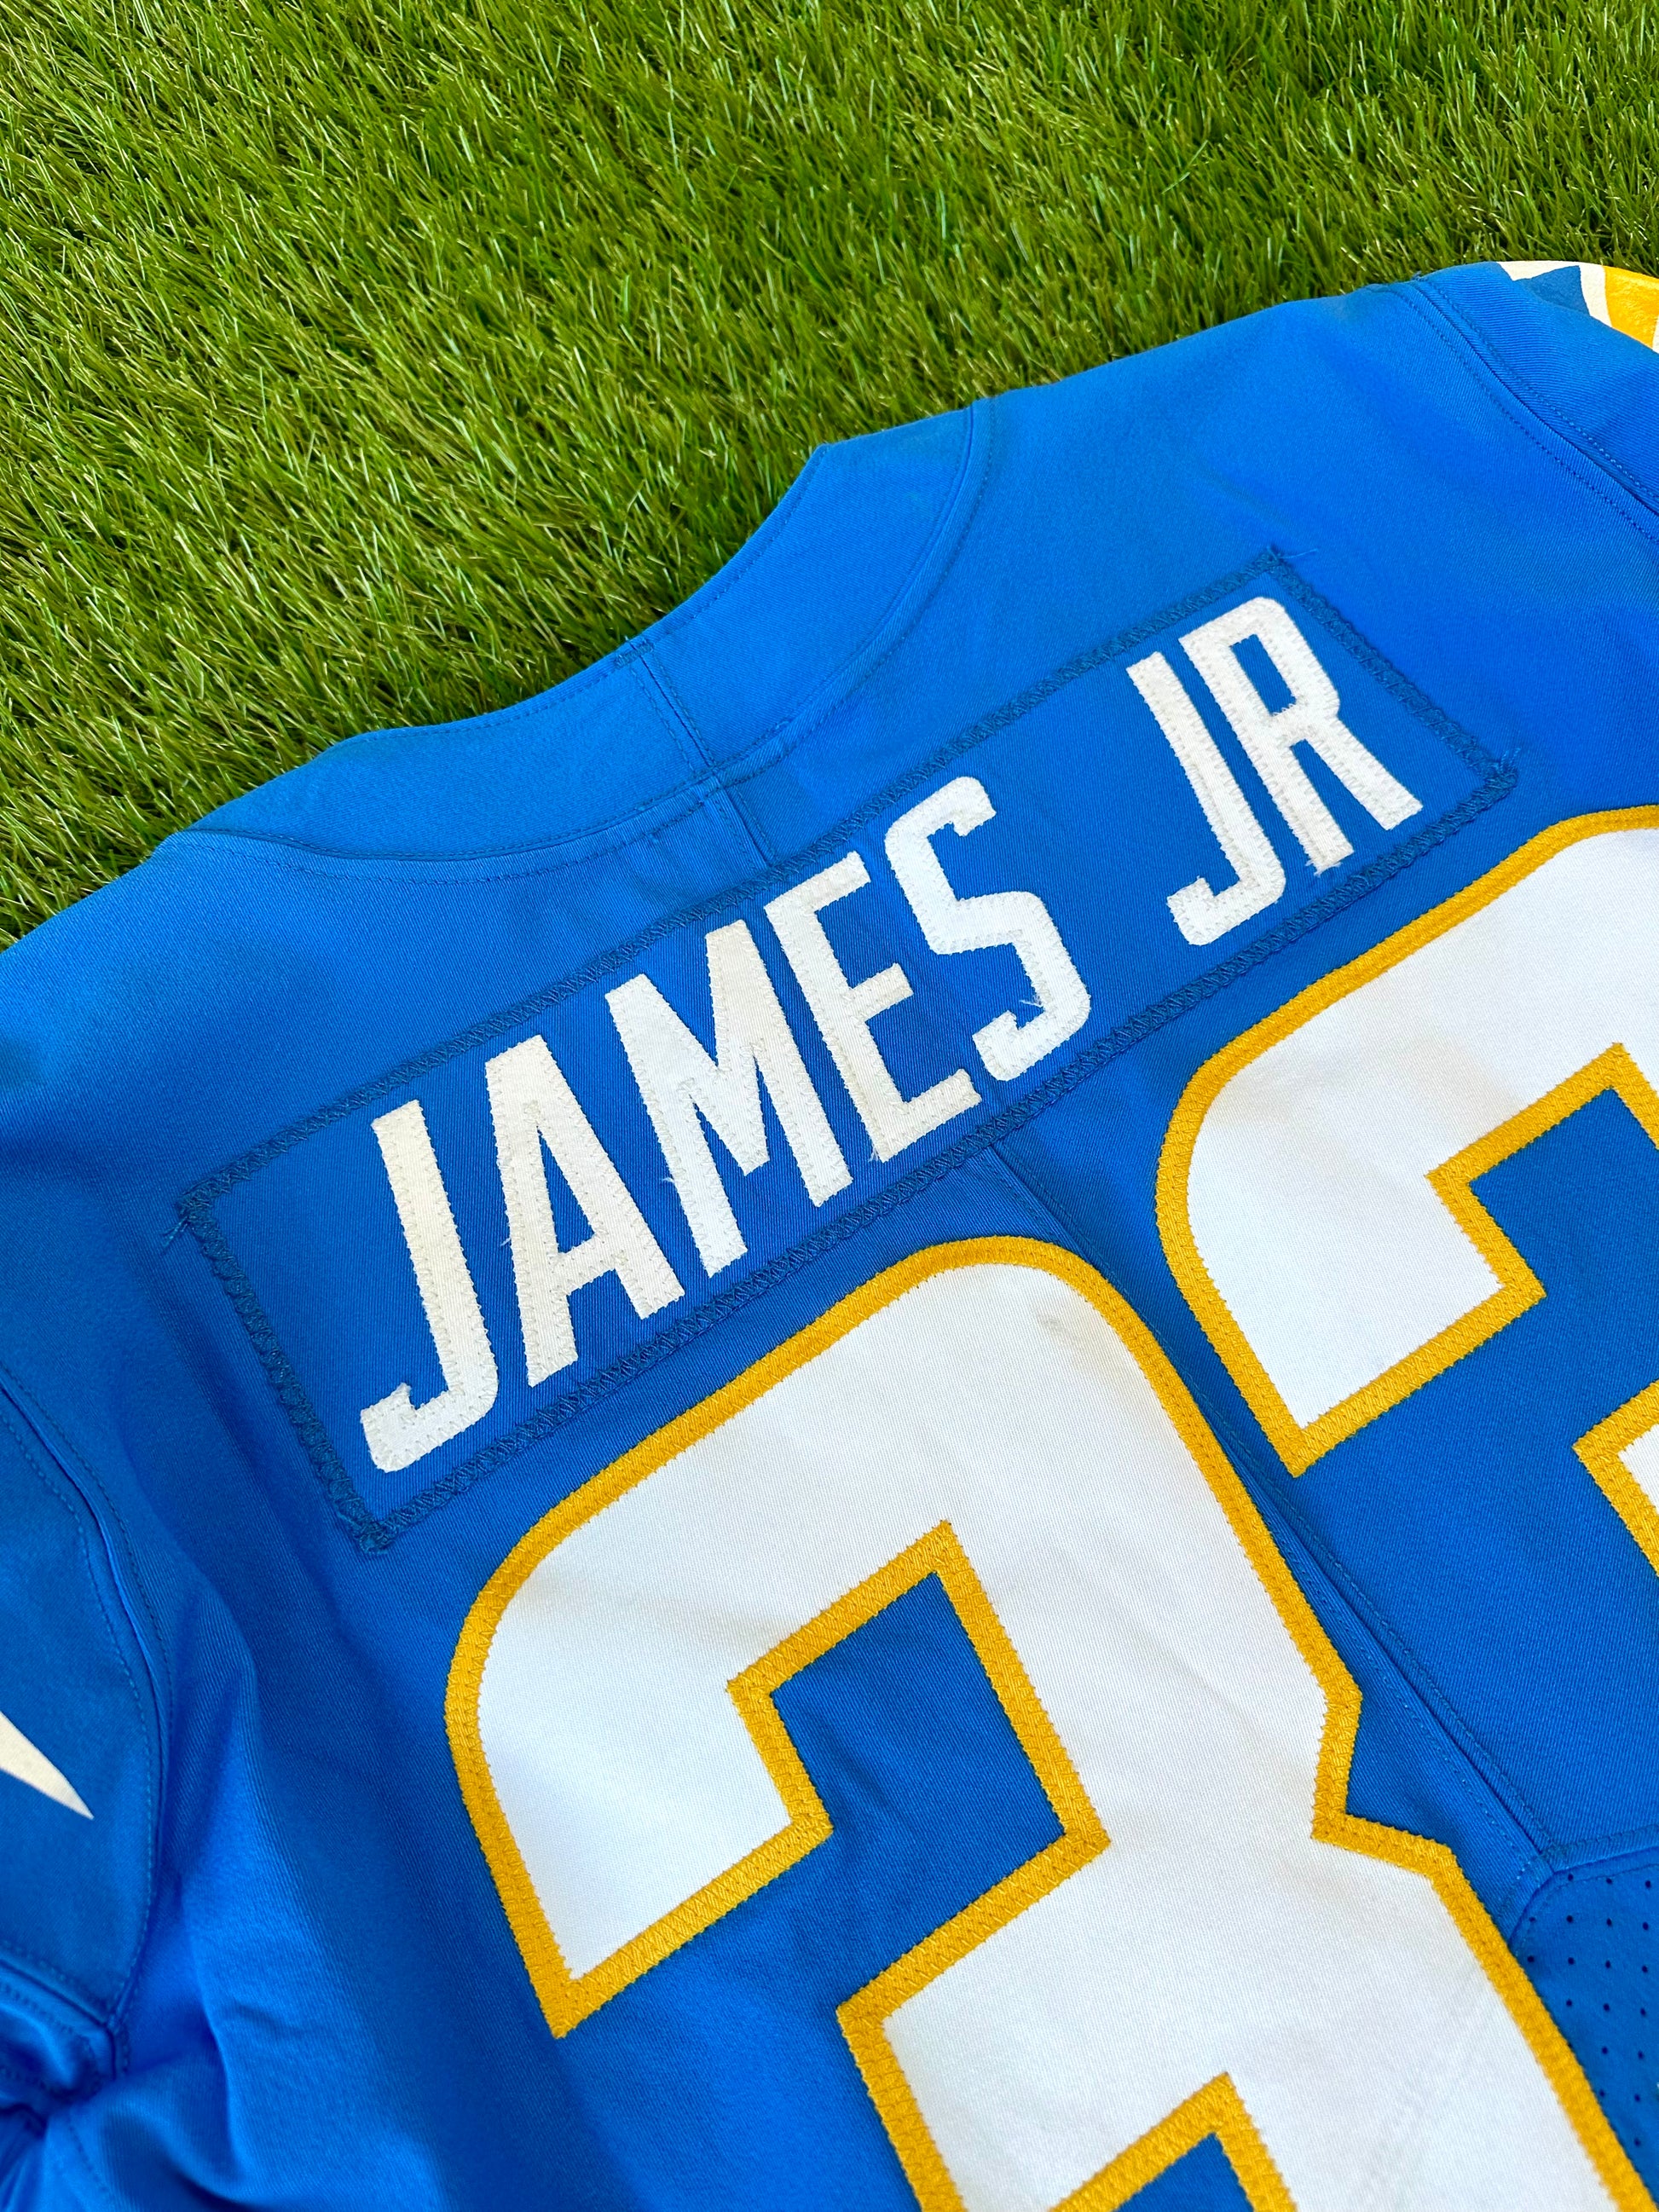 Los Angeles Chargers Derwin James Jr. 2021 Practice Worn NFL Football –  Grail Snipes